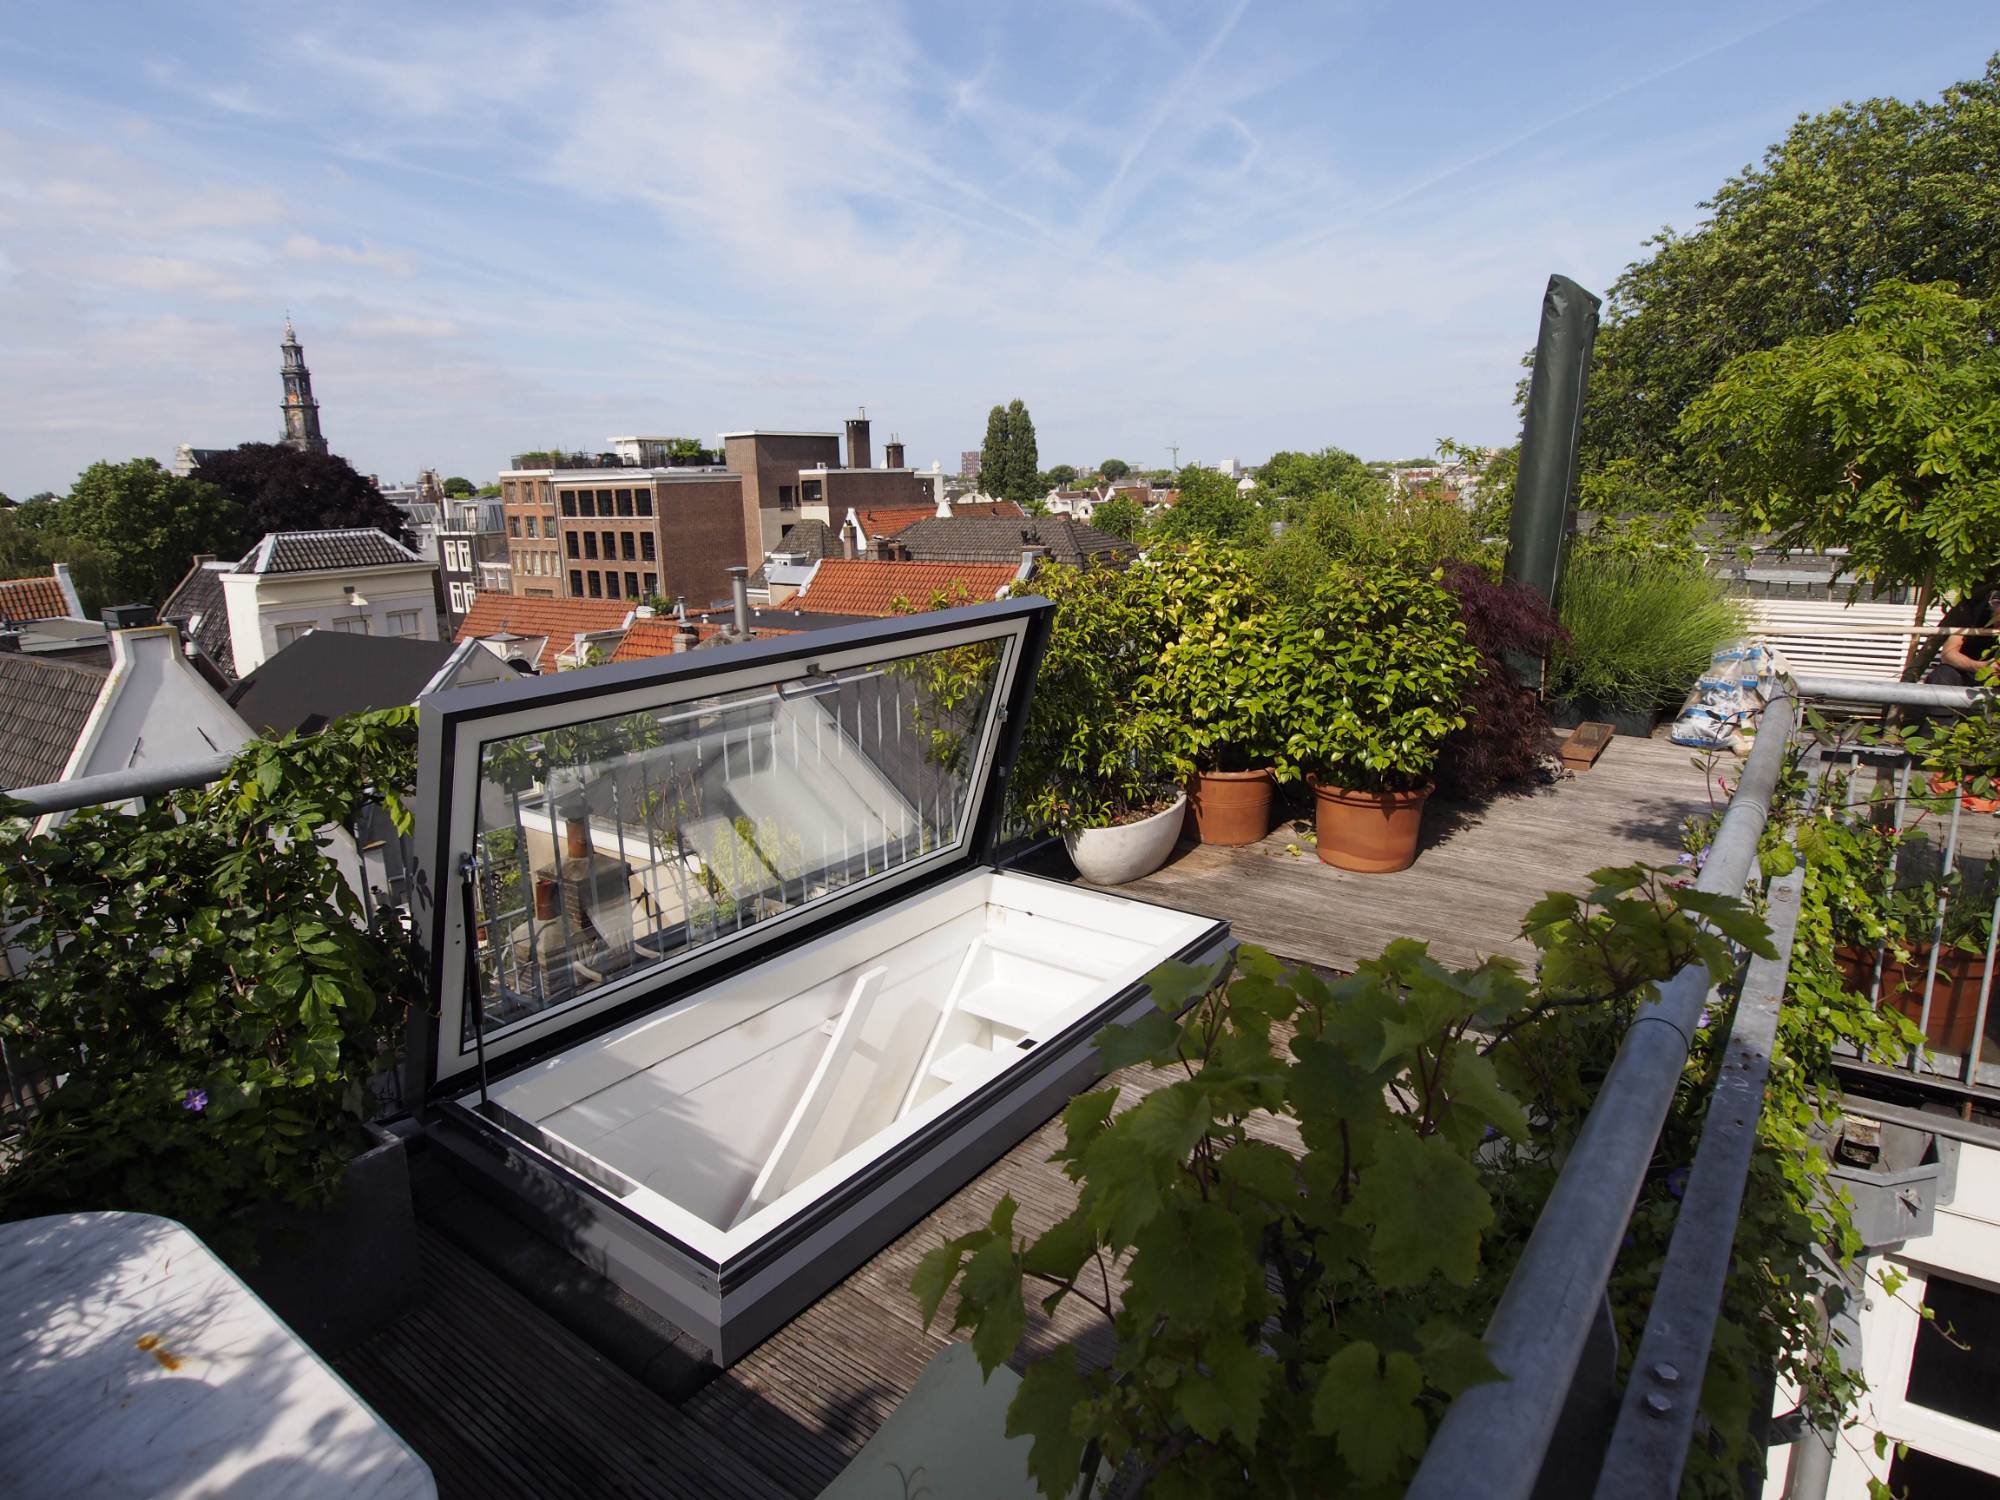 Opening Access Hatch Rooflights